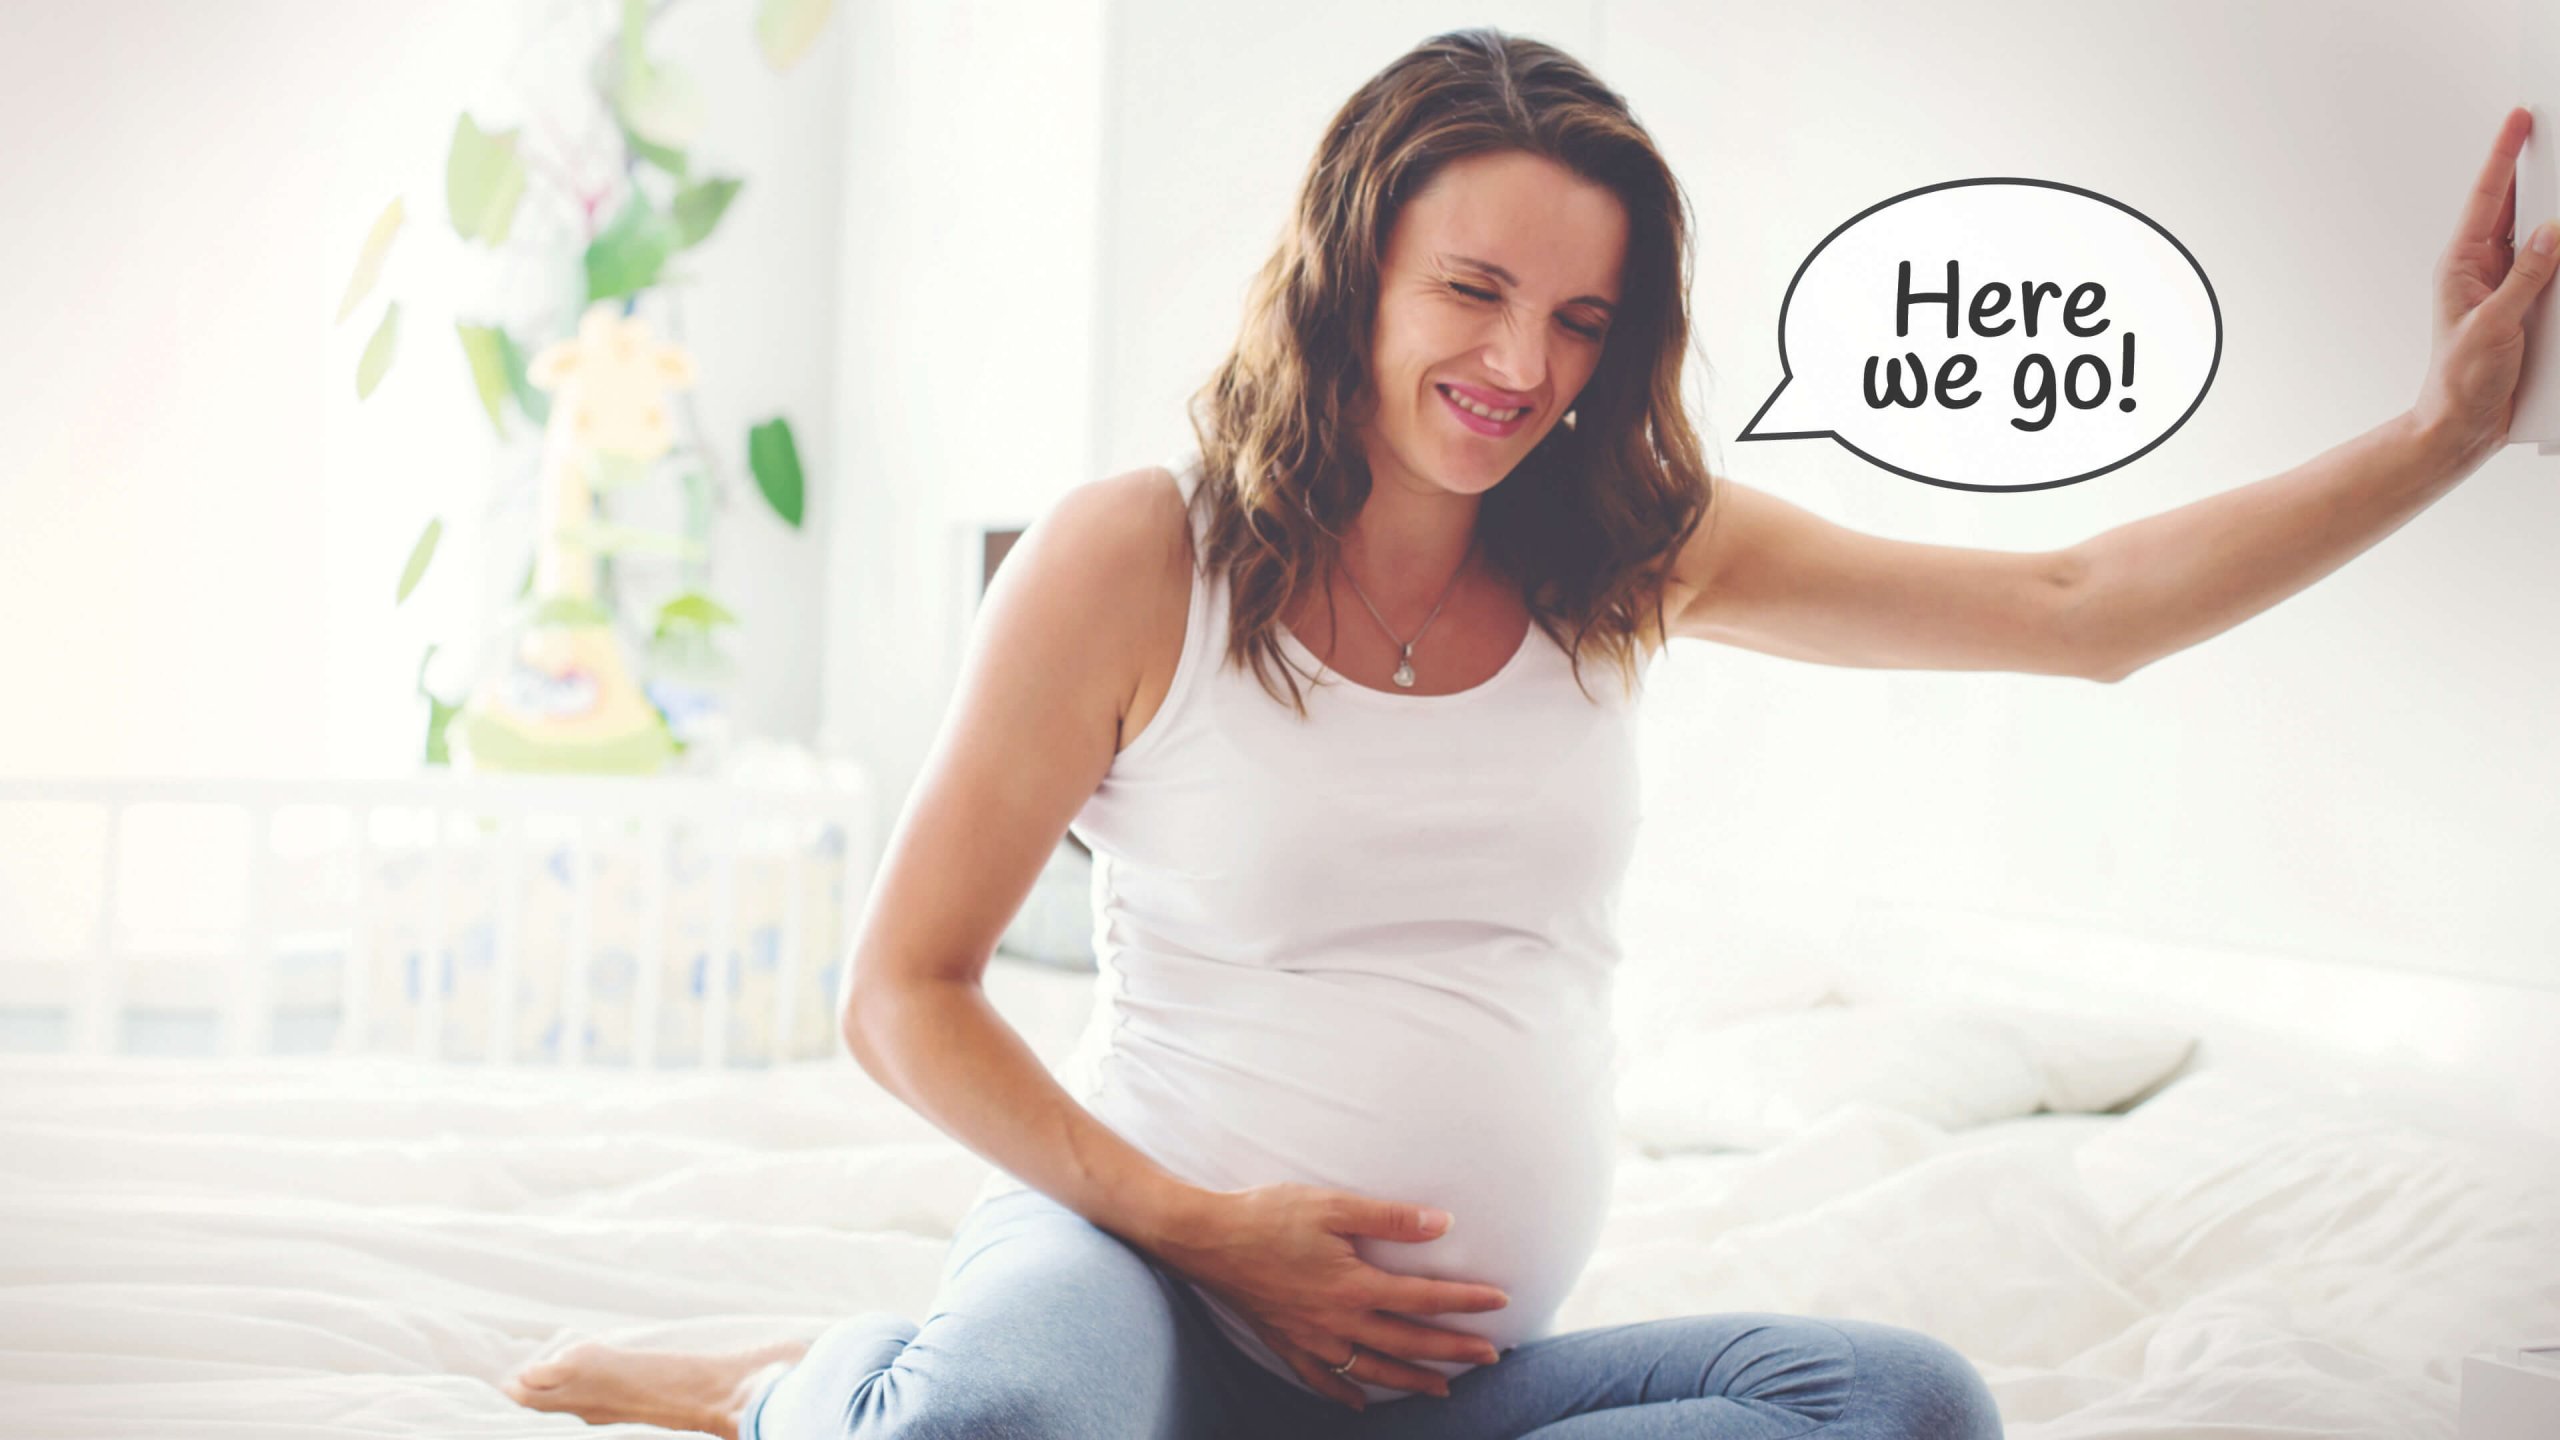 Tried and true tricks to induce labor naturally! Includes evidence-based ways to induce labor, plus tips from other mamas on natural labor induction.